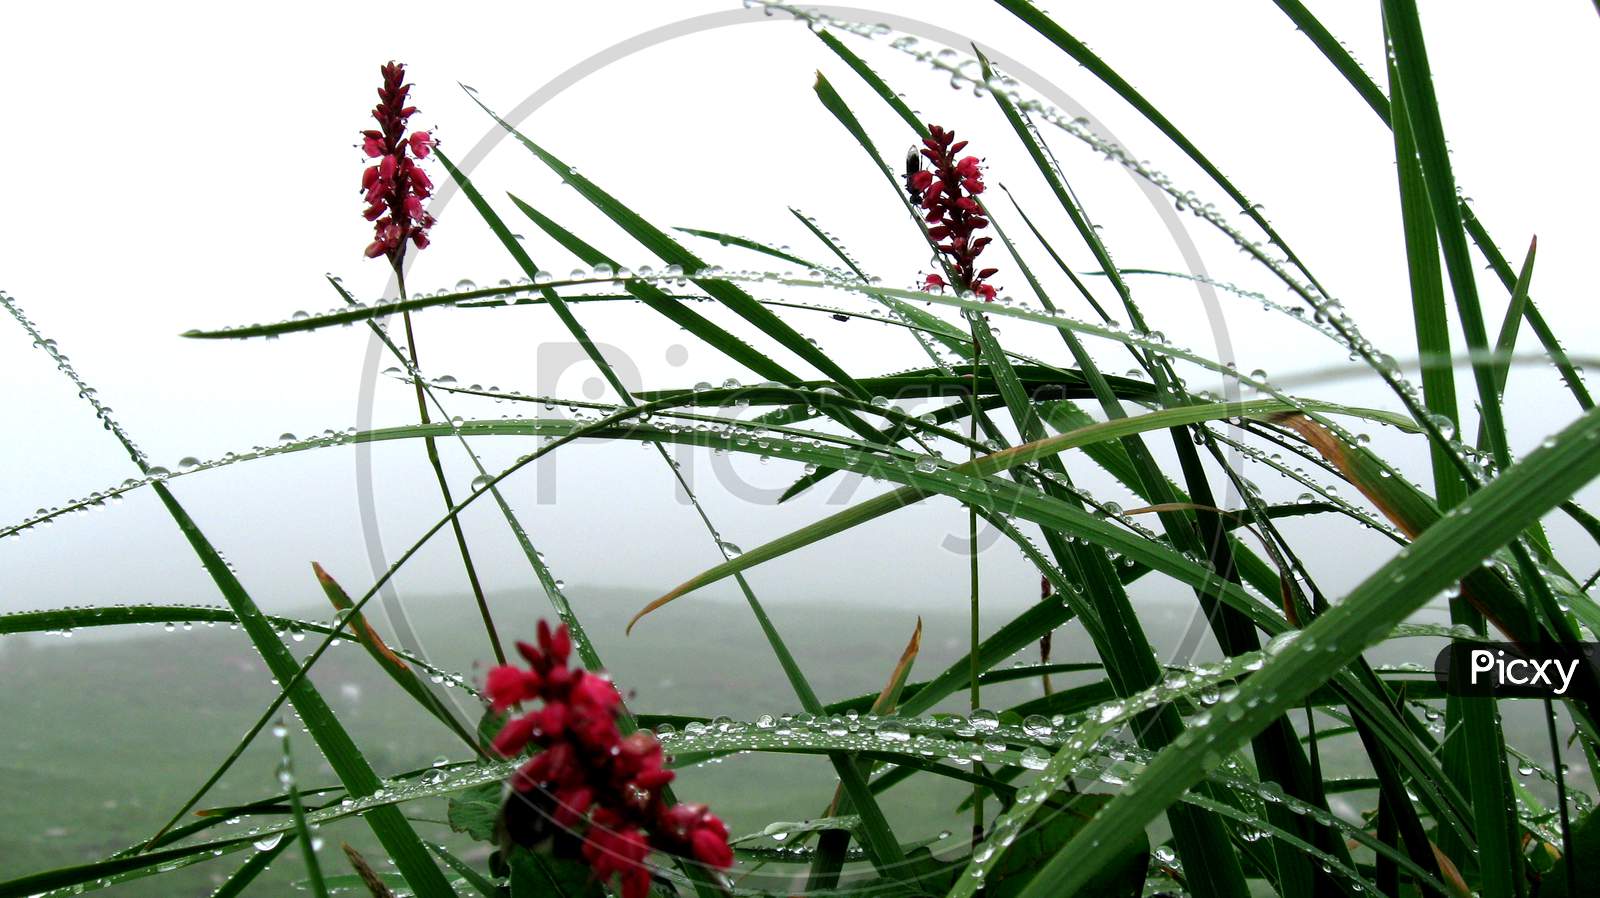 Water droplets shining in grassy vegetation with red flowers